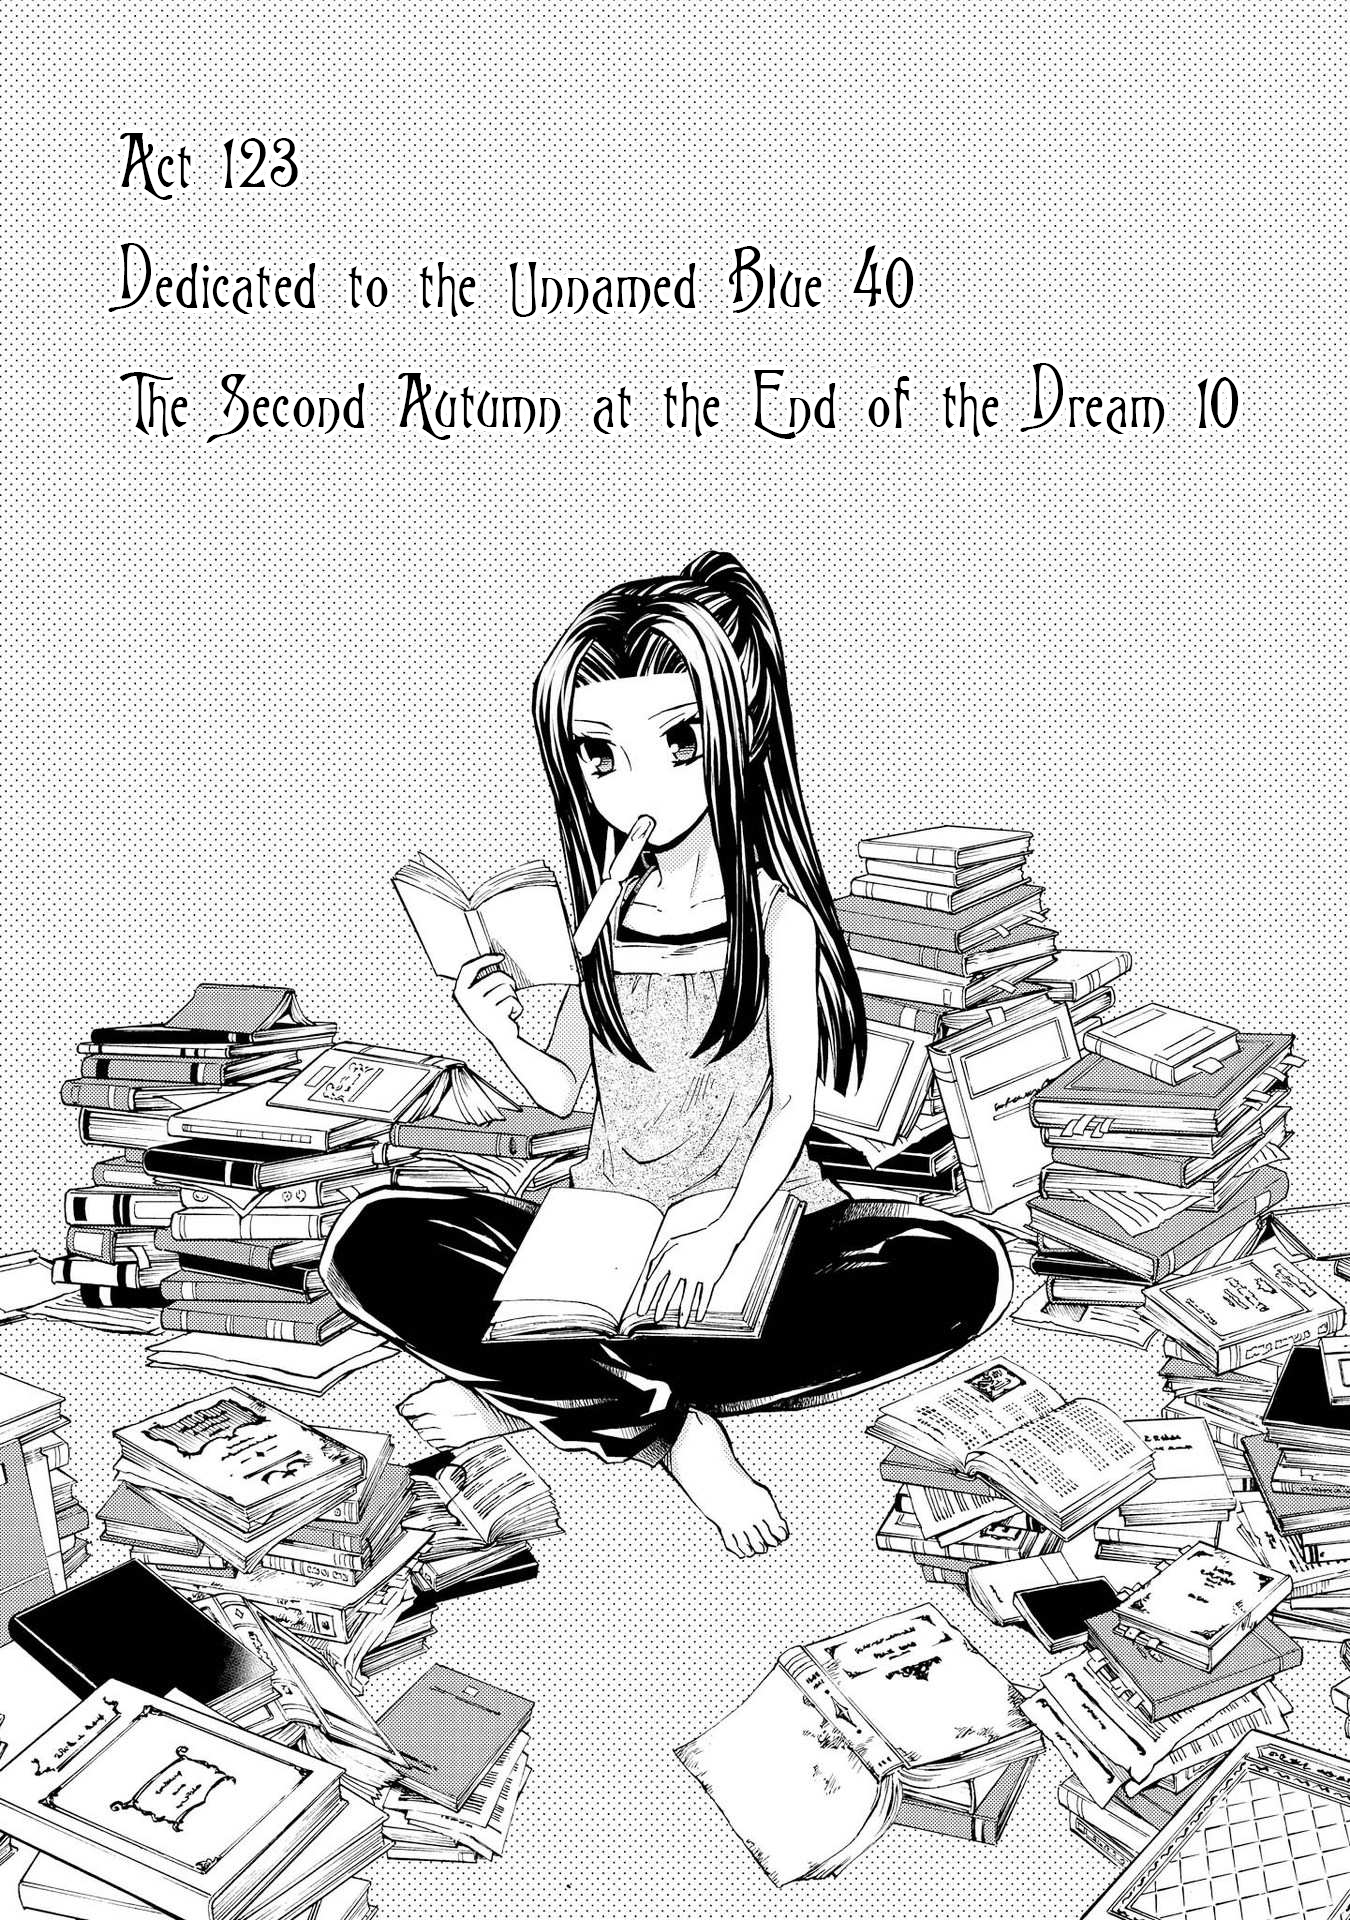 Hatenkou Yuugi Vol.18 Chapter 123: Dedicated To The Unnamed Blue #40 - The Second Autumn At The End Of The Dream #10 - Picture 1